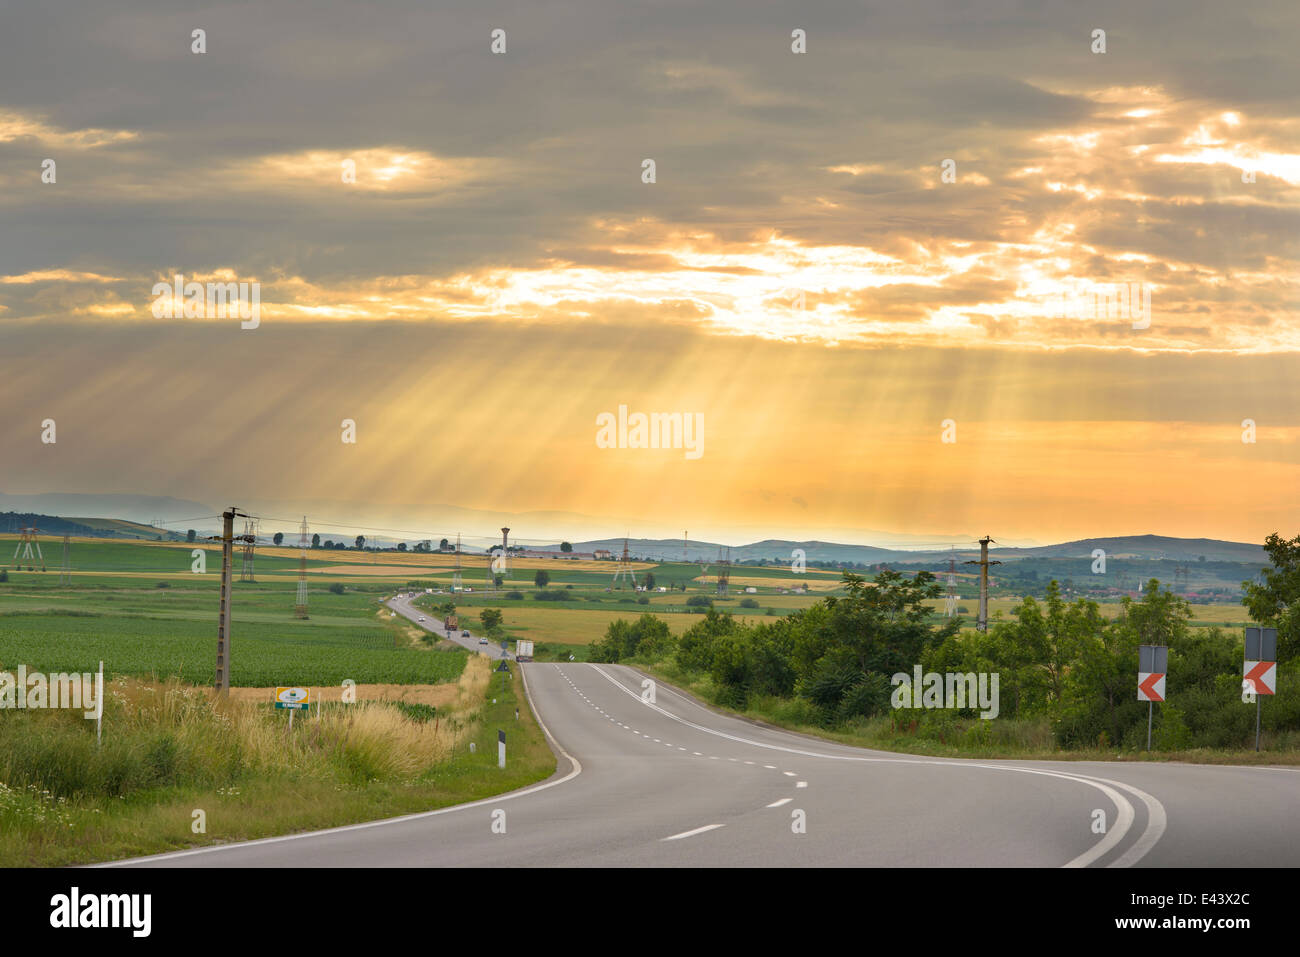 Sinuous Road in Summer Day, sunset scenery Stock Photo